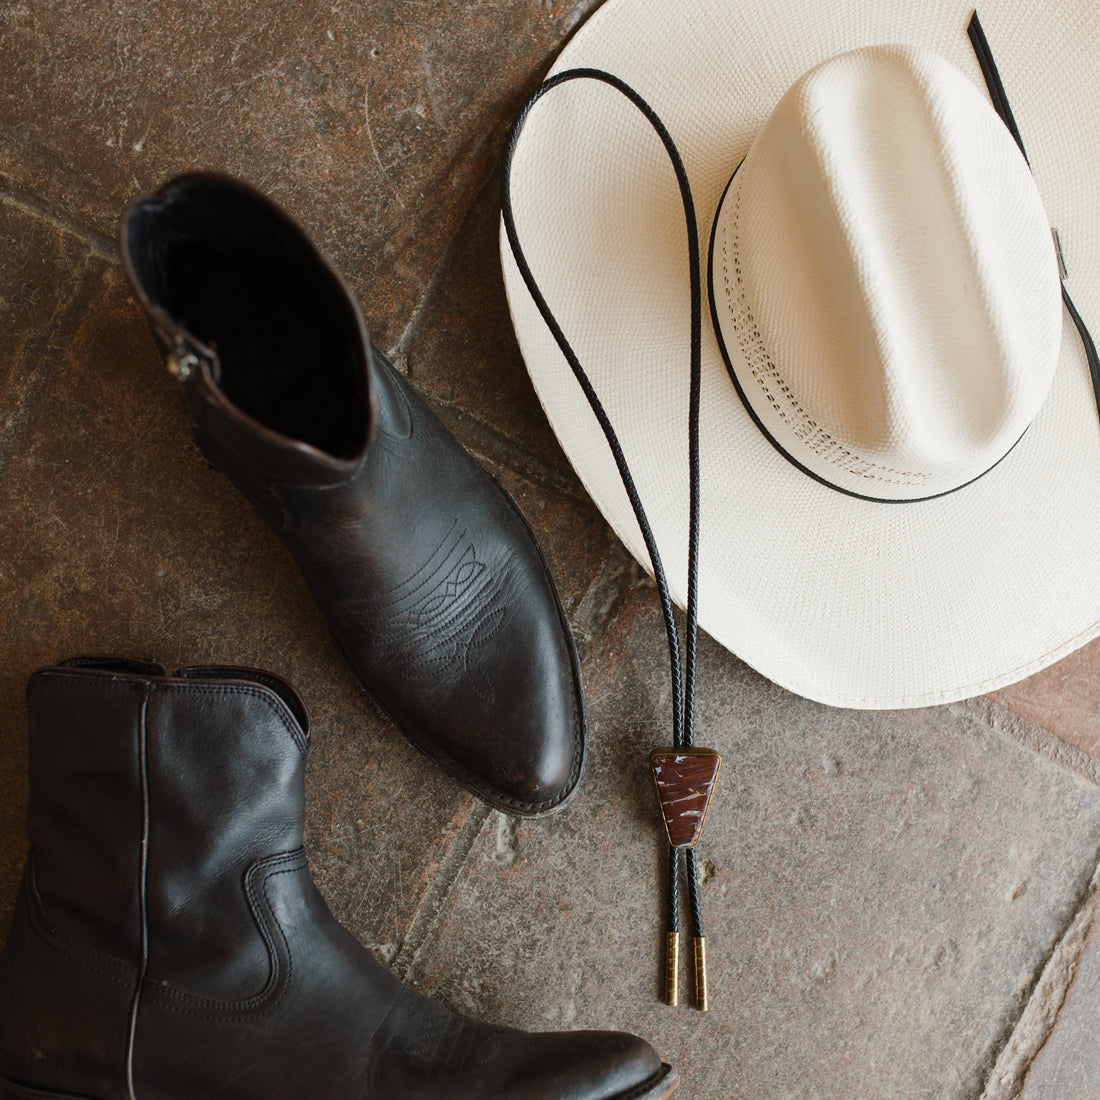 Rattlesnake Jasper Bolo Tie adds Western flair to a groom's outfit while maintaining a modern, classy vibe. 